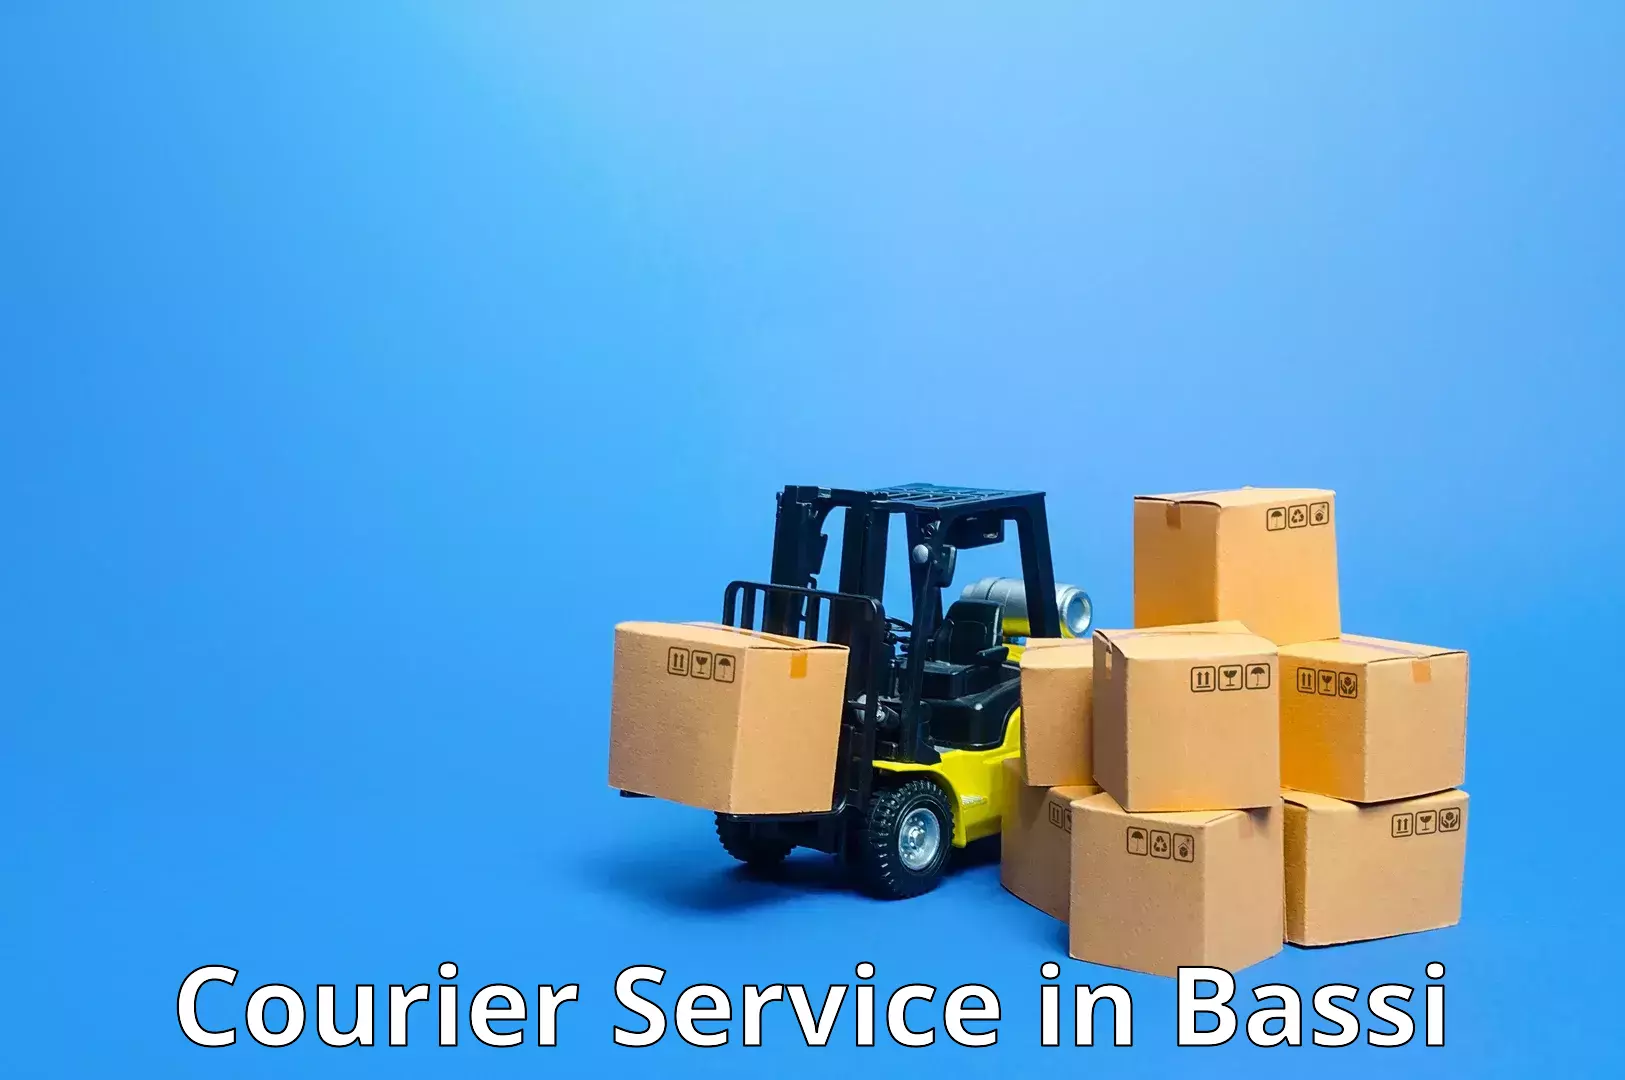 Express delivery solutions in Bassi